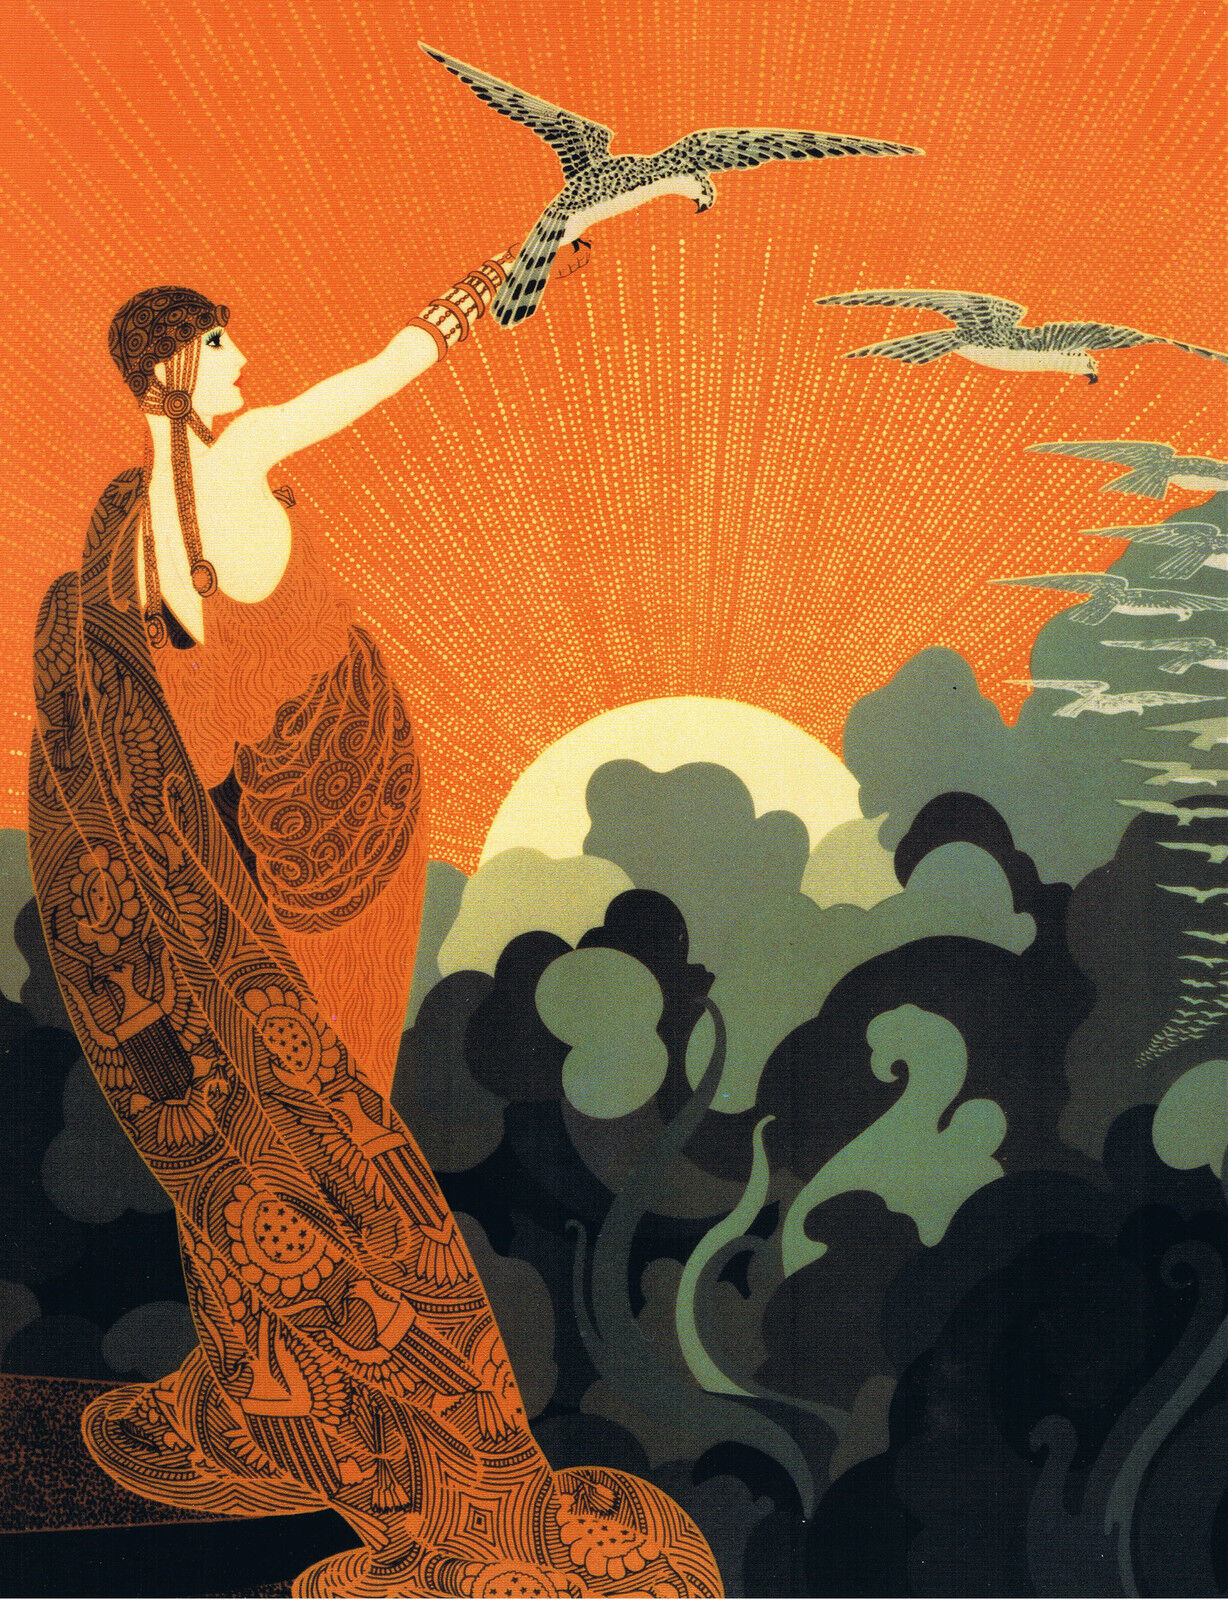 ART DECO LADY WITH FALCONS A 3 SIZE. Poster print.